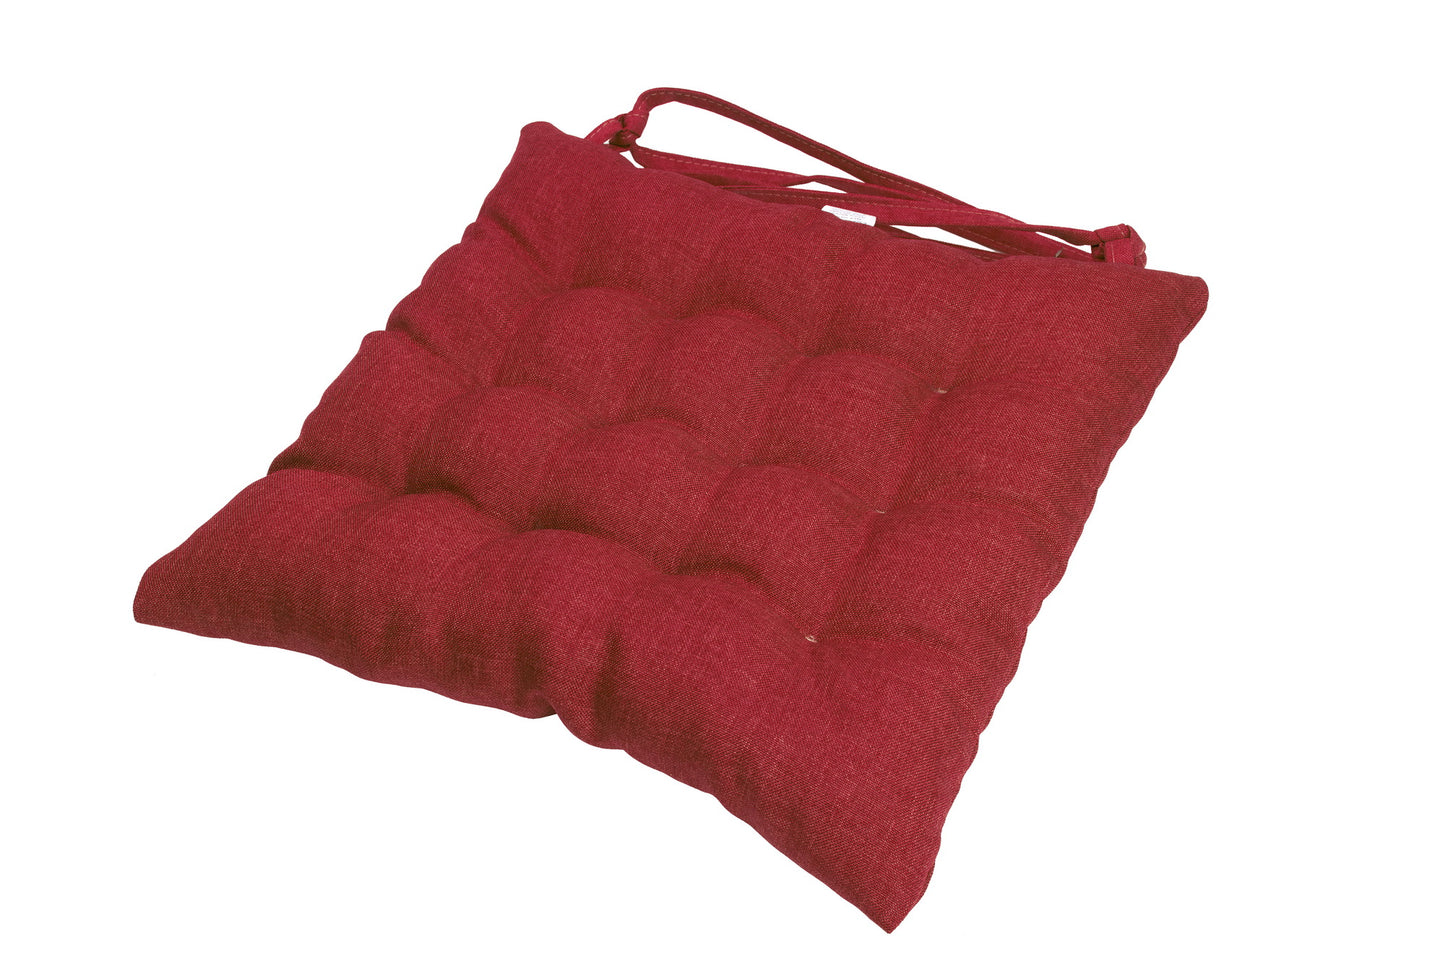 Quilted chair cushions with fastening straps, elegant chair cushions for the kitchen and garden